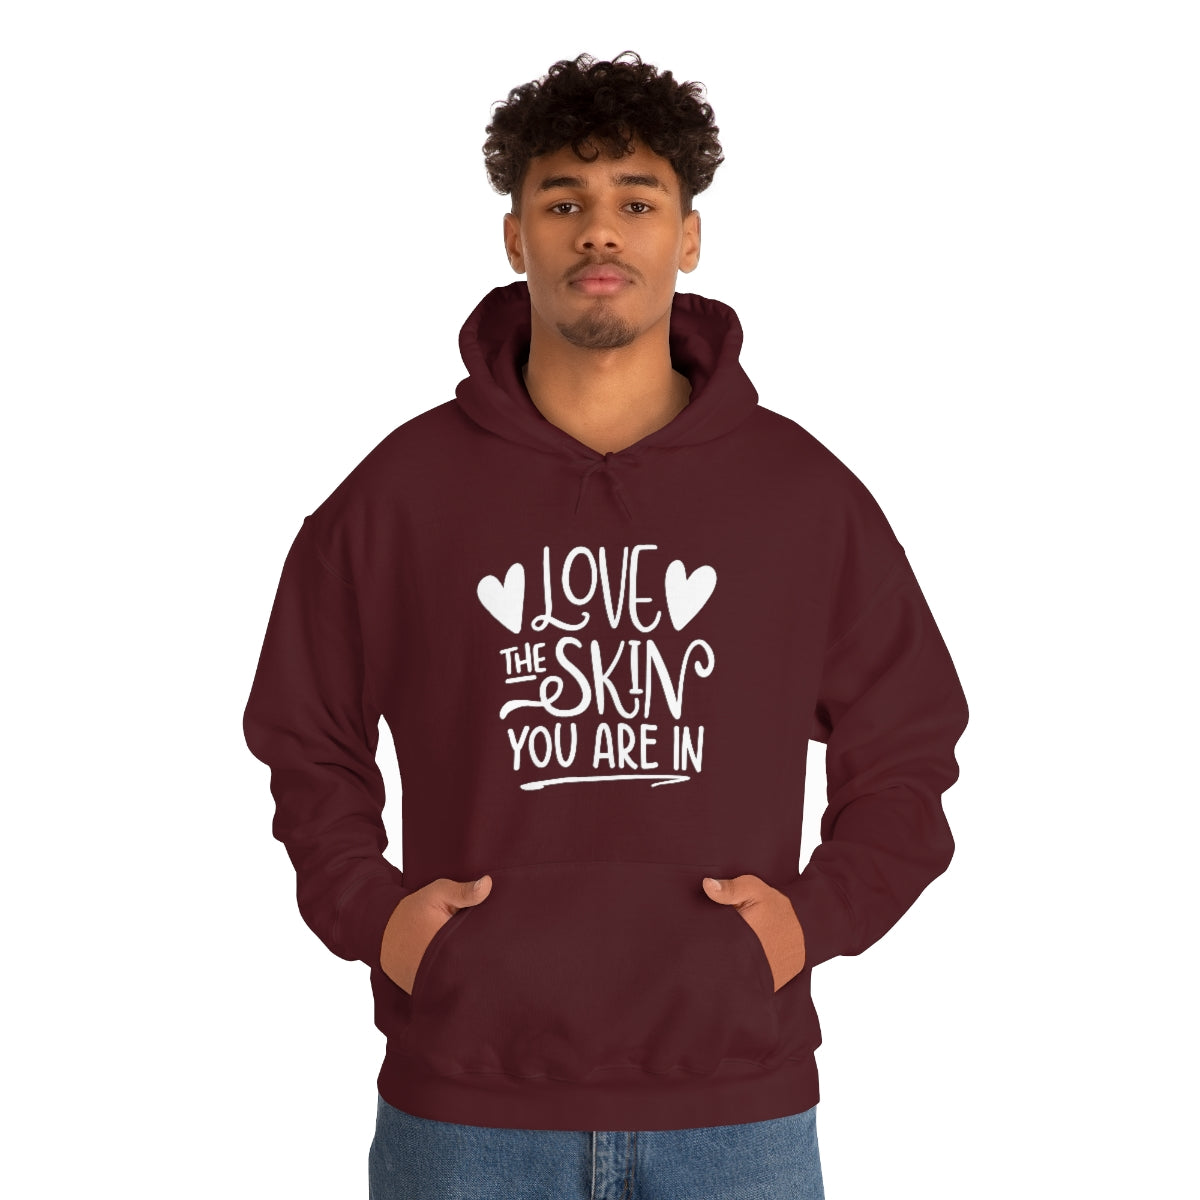 Affirmation Feminist Pro Choice Unisex Hoodie - Love the Skin You are In Printify